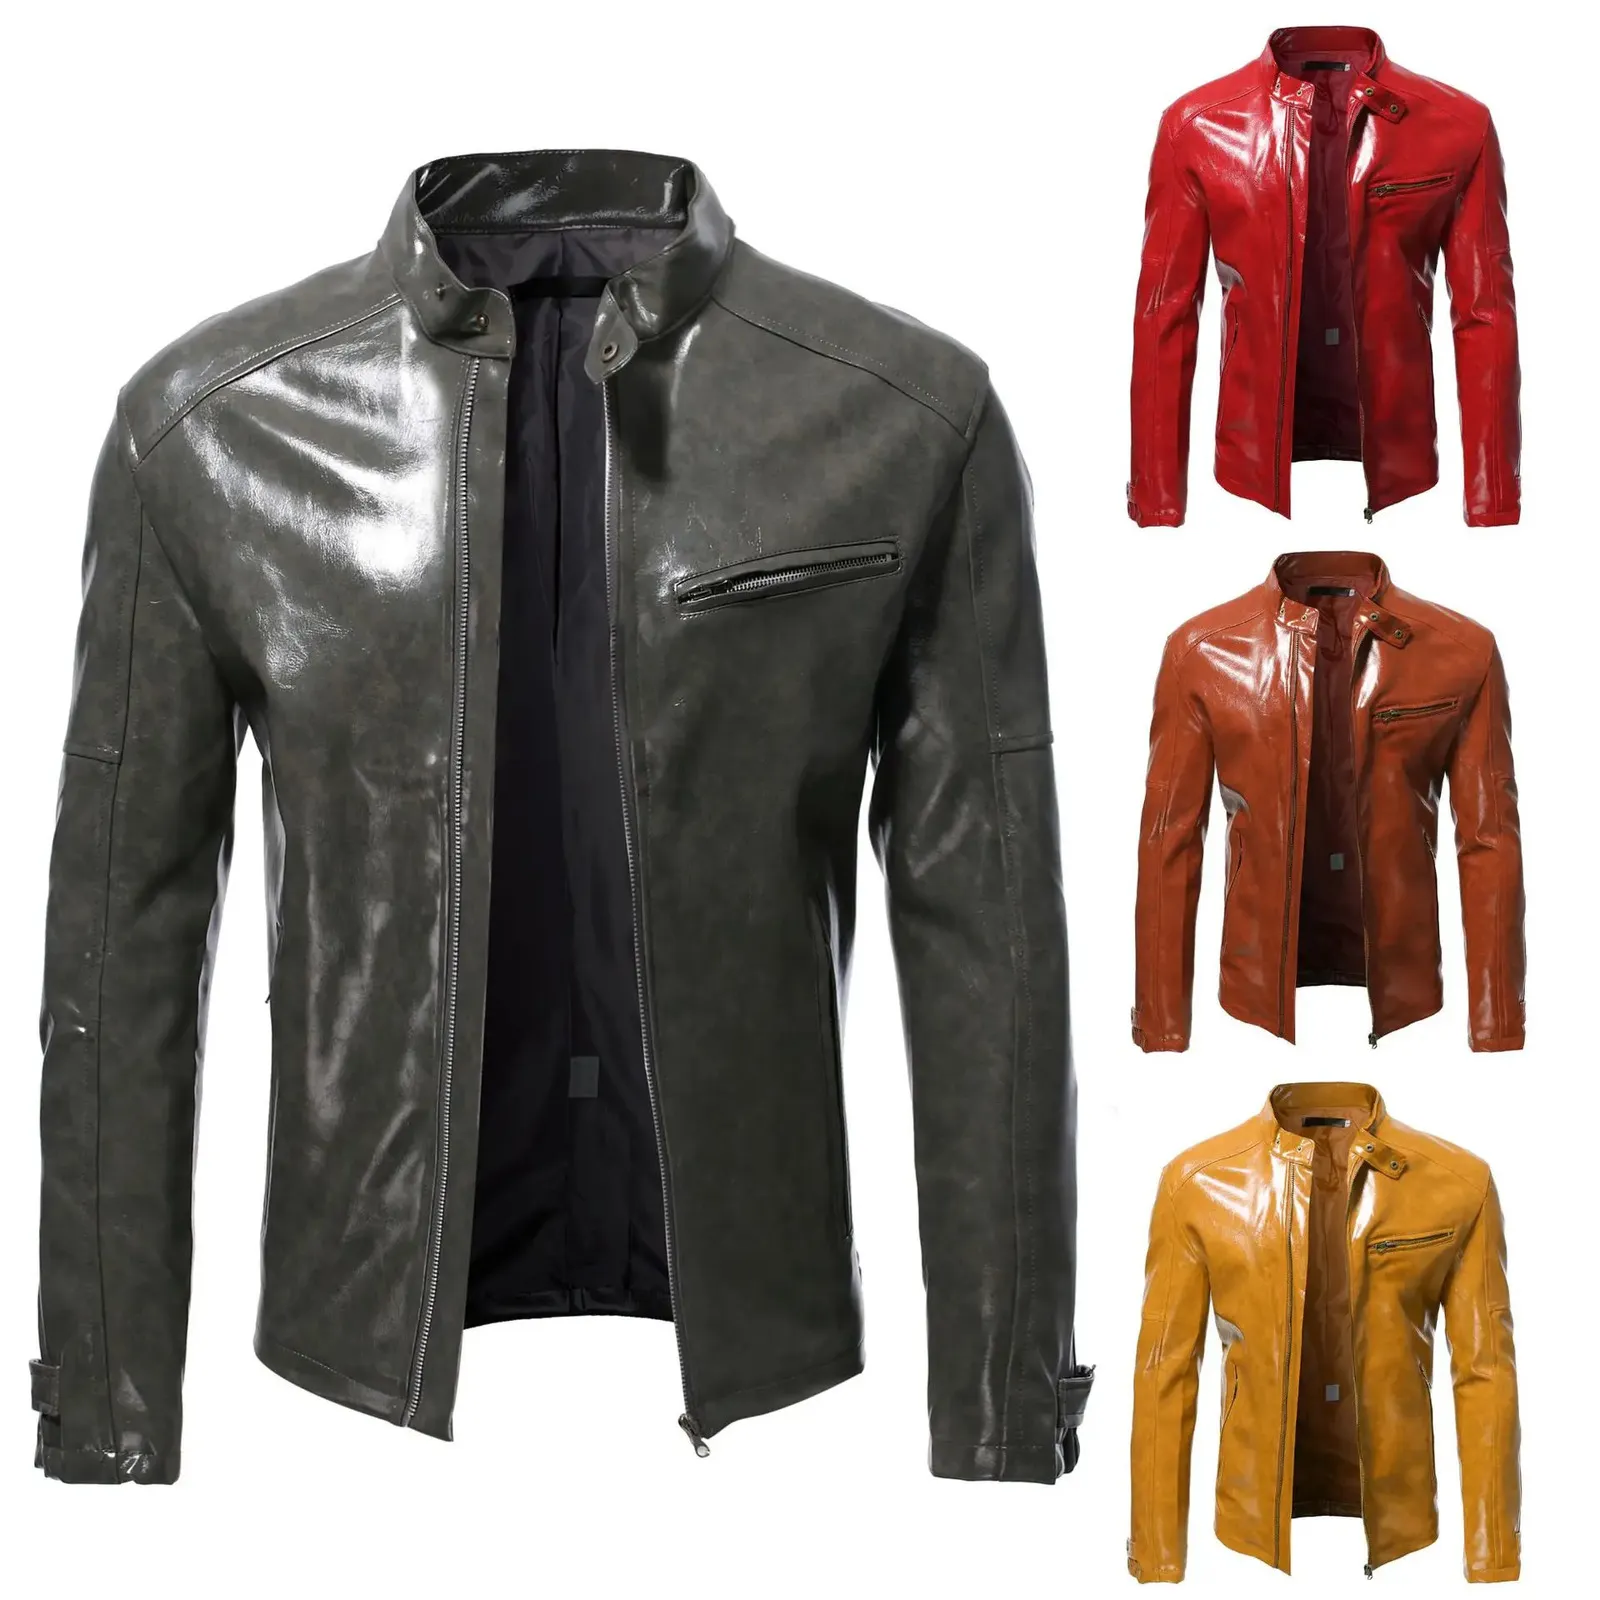 Men's Autumn Shiny Leather Jacket Fashion Self-cultivation Stand-up Collar Motorcycle Suit PU Handsome Short Top S-5XL 240108